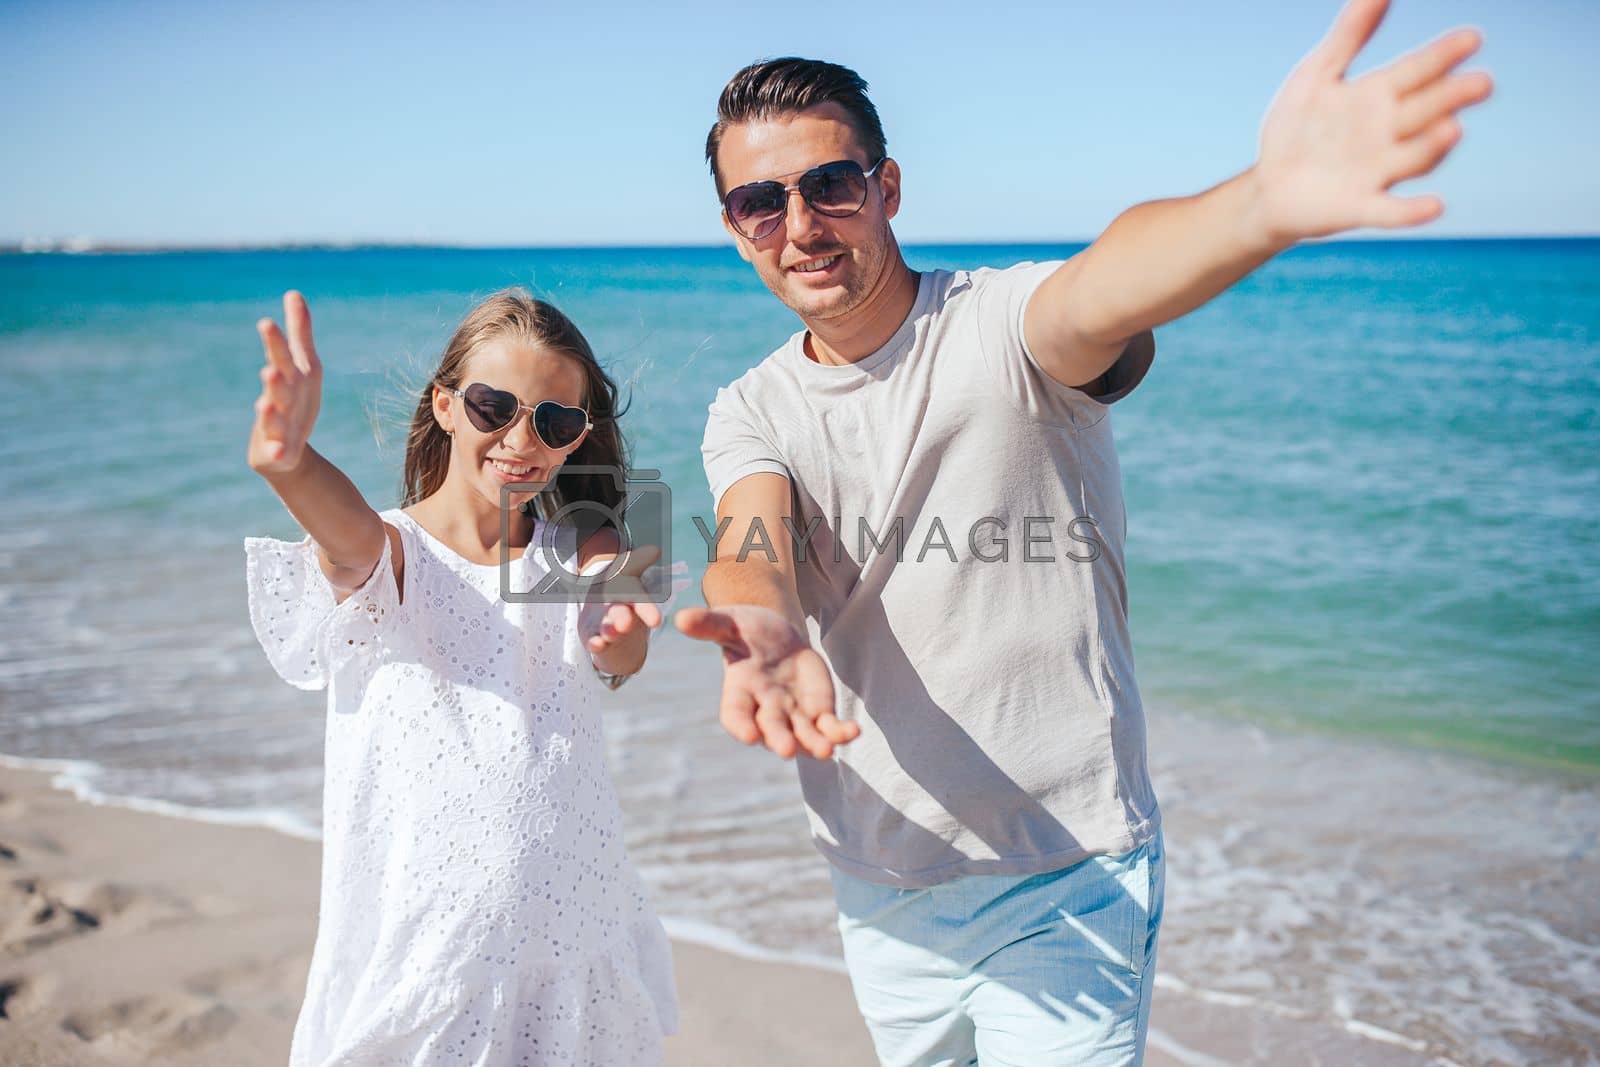 Royalty free image of Little girl and happy dad having fun during beach vacation by travnikovstudio